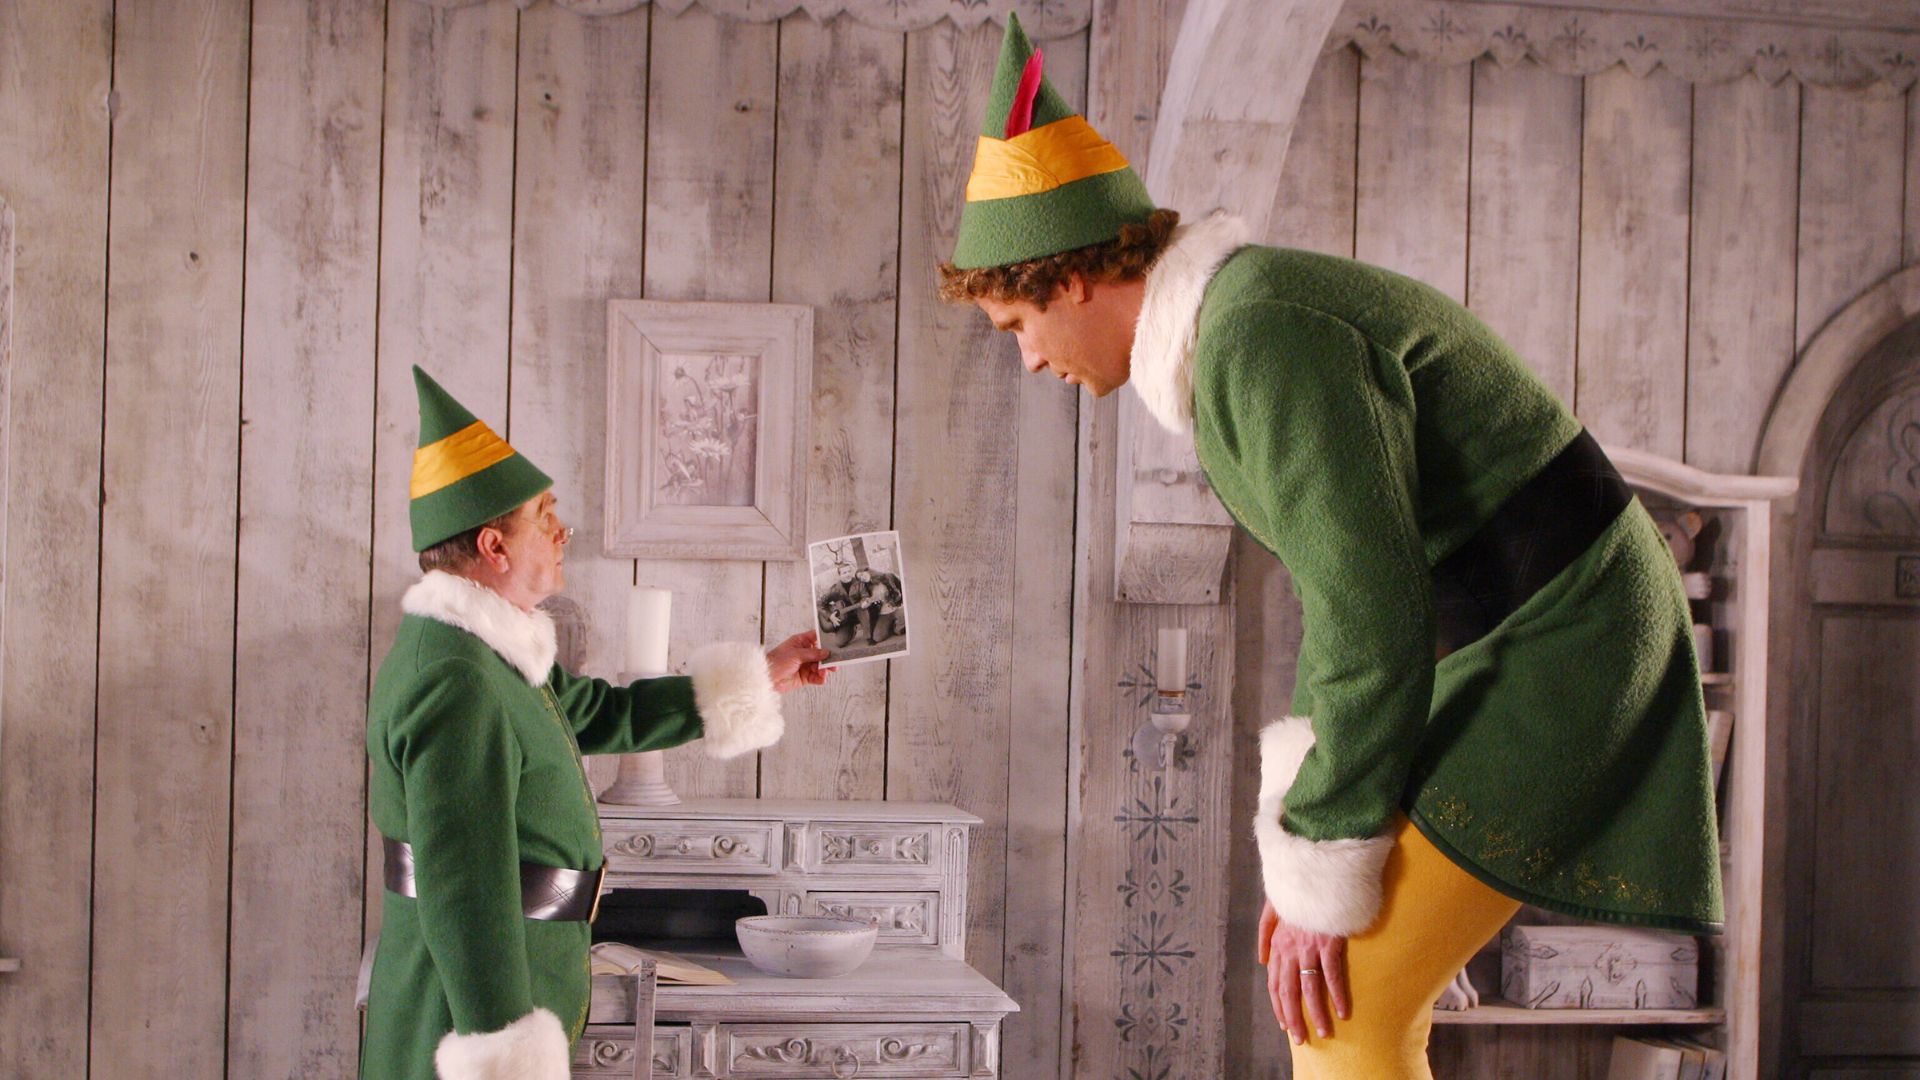 A small elf stands next to a large elf in the movie Elf